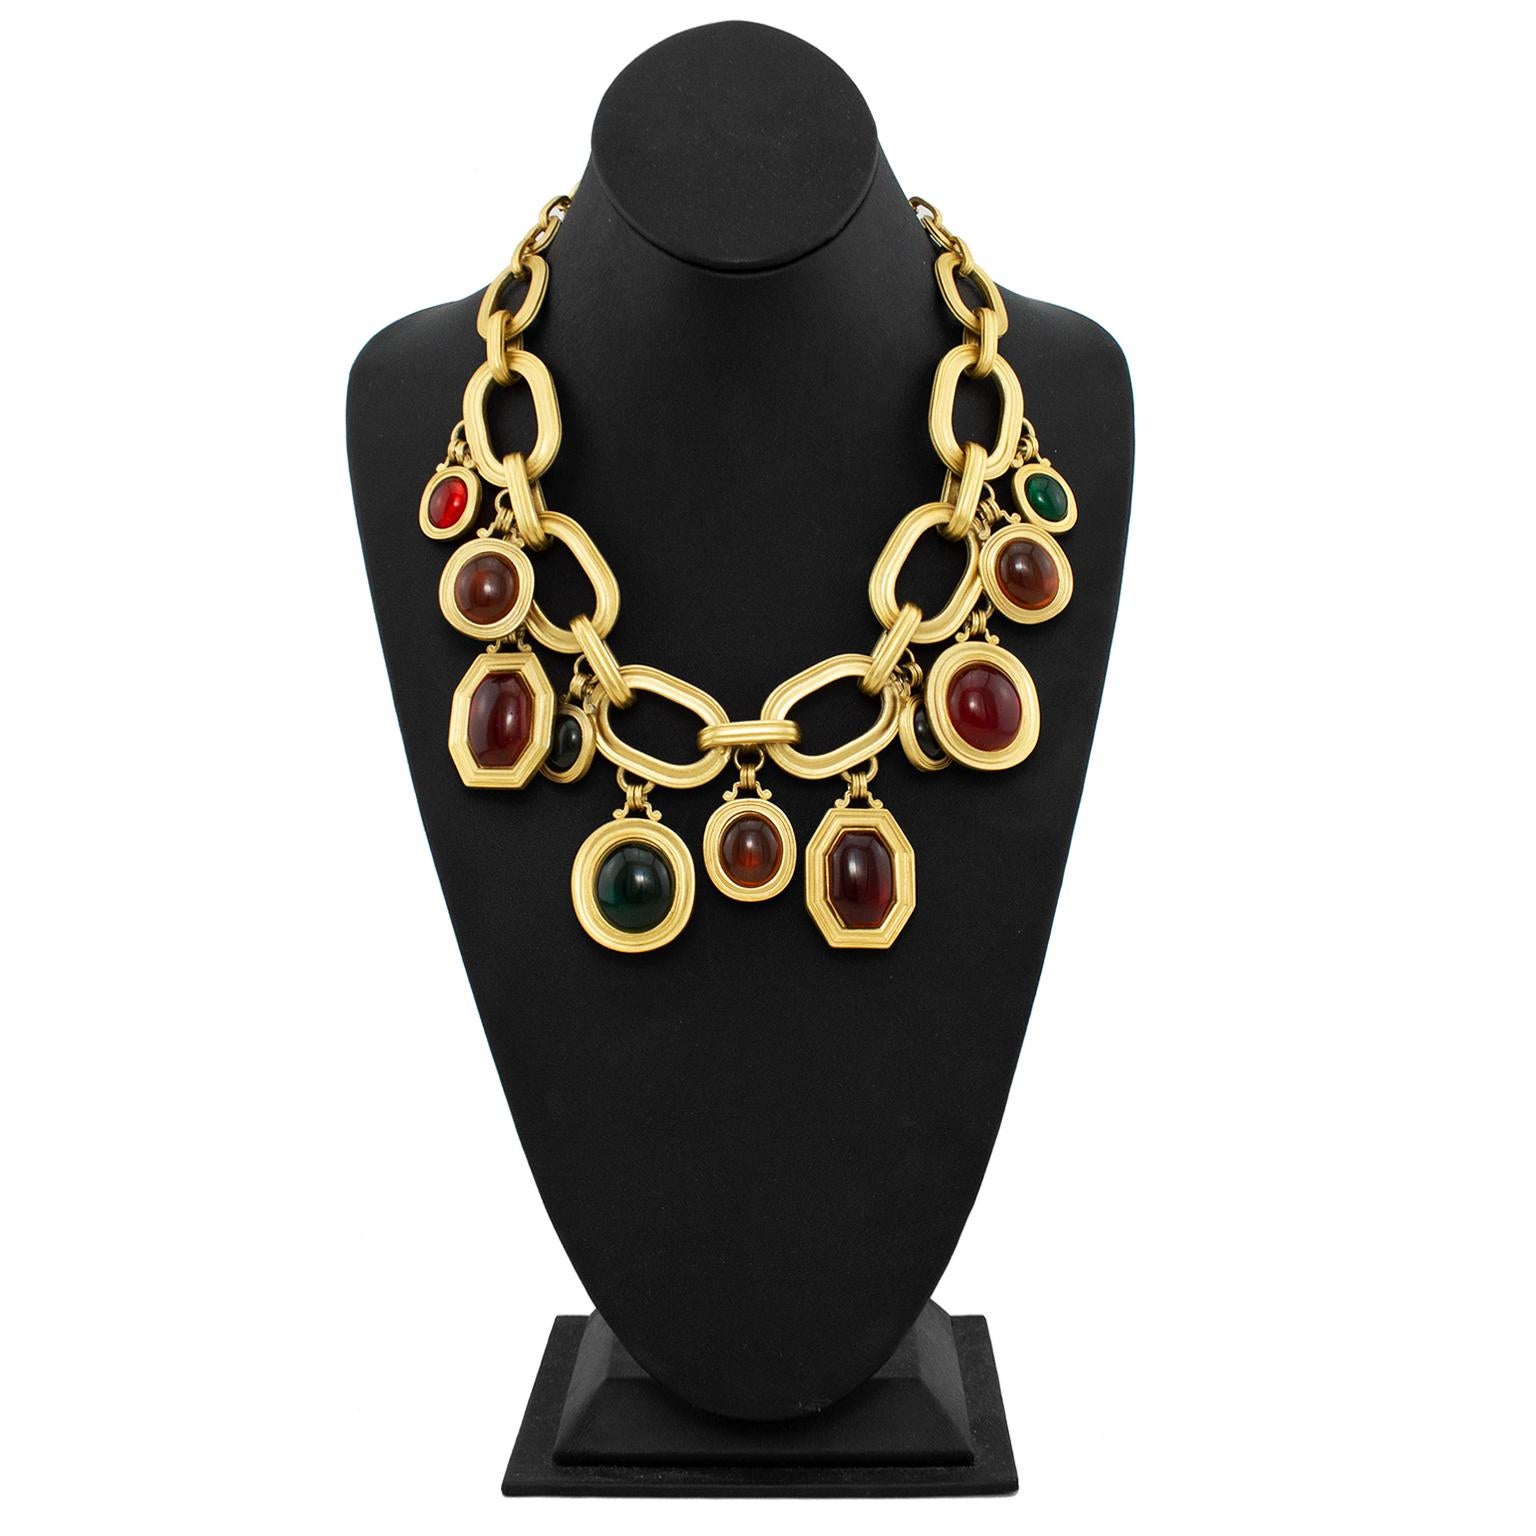 Very beautiful Yves Saint Laurent limited edition statement necklace from the 1980s. Pale matte gold metal large chain with 11 hanging pendants. The pendants vary in size in shape and are green, amber and red. Much of the YSL jewelry from this era